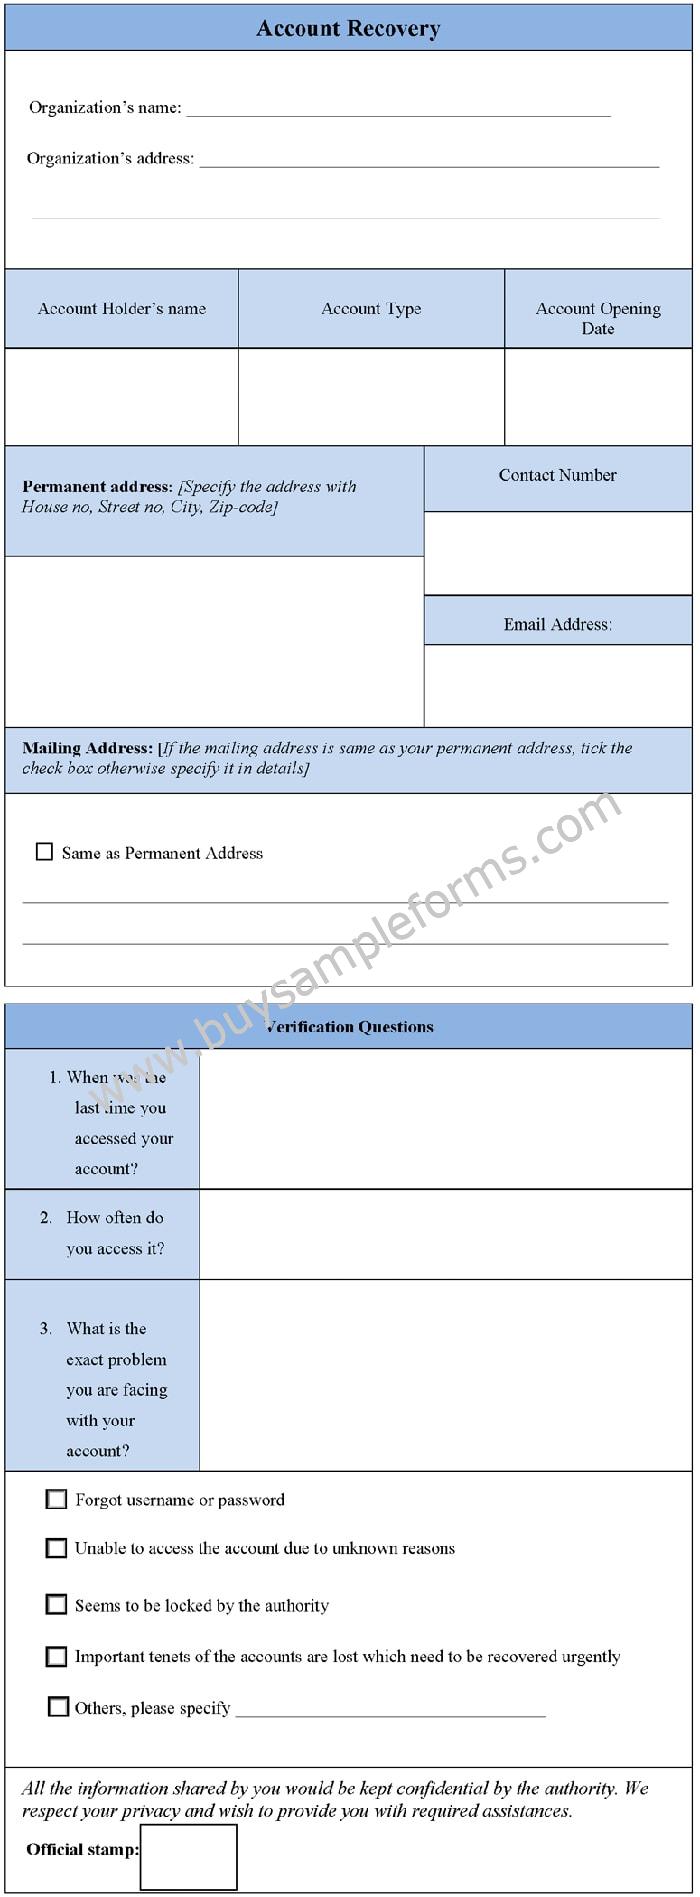 Sample Account Recovery Form Template